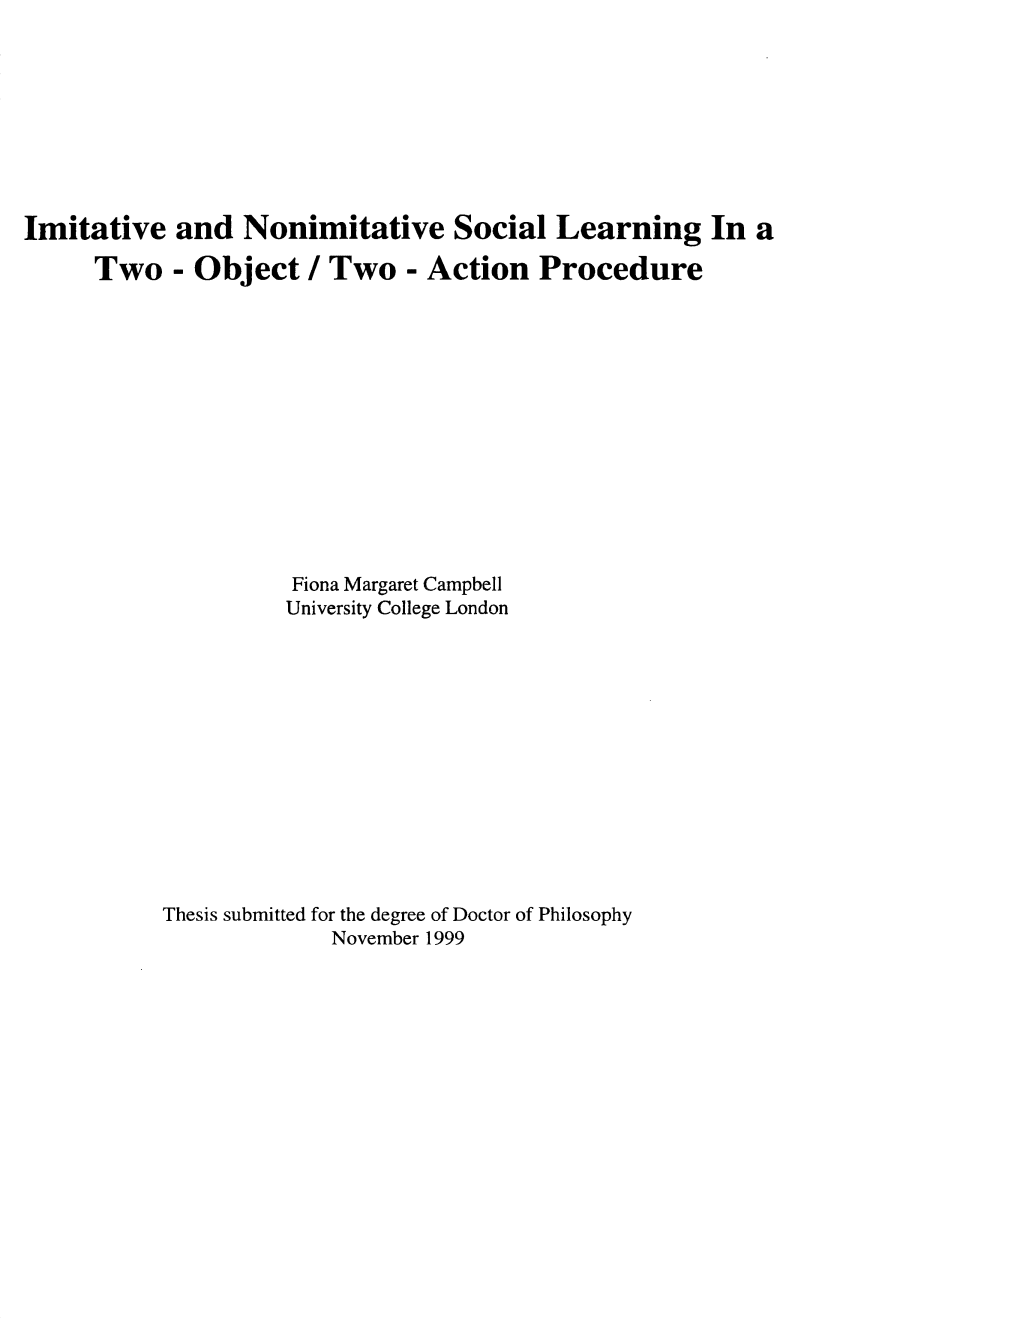 Imitative and Nonimitative Social Learning in Two - Object / Two - Action Procedure